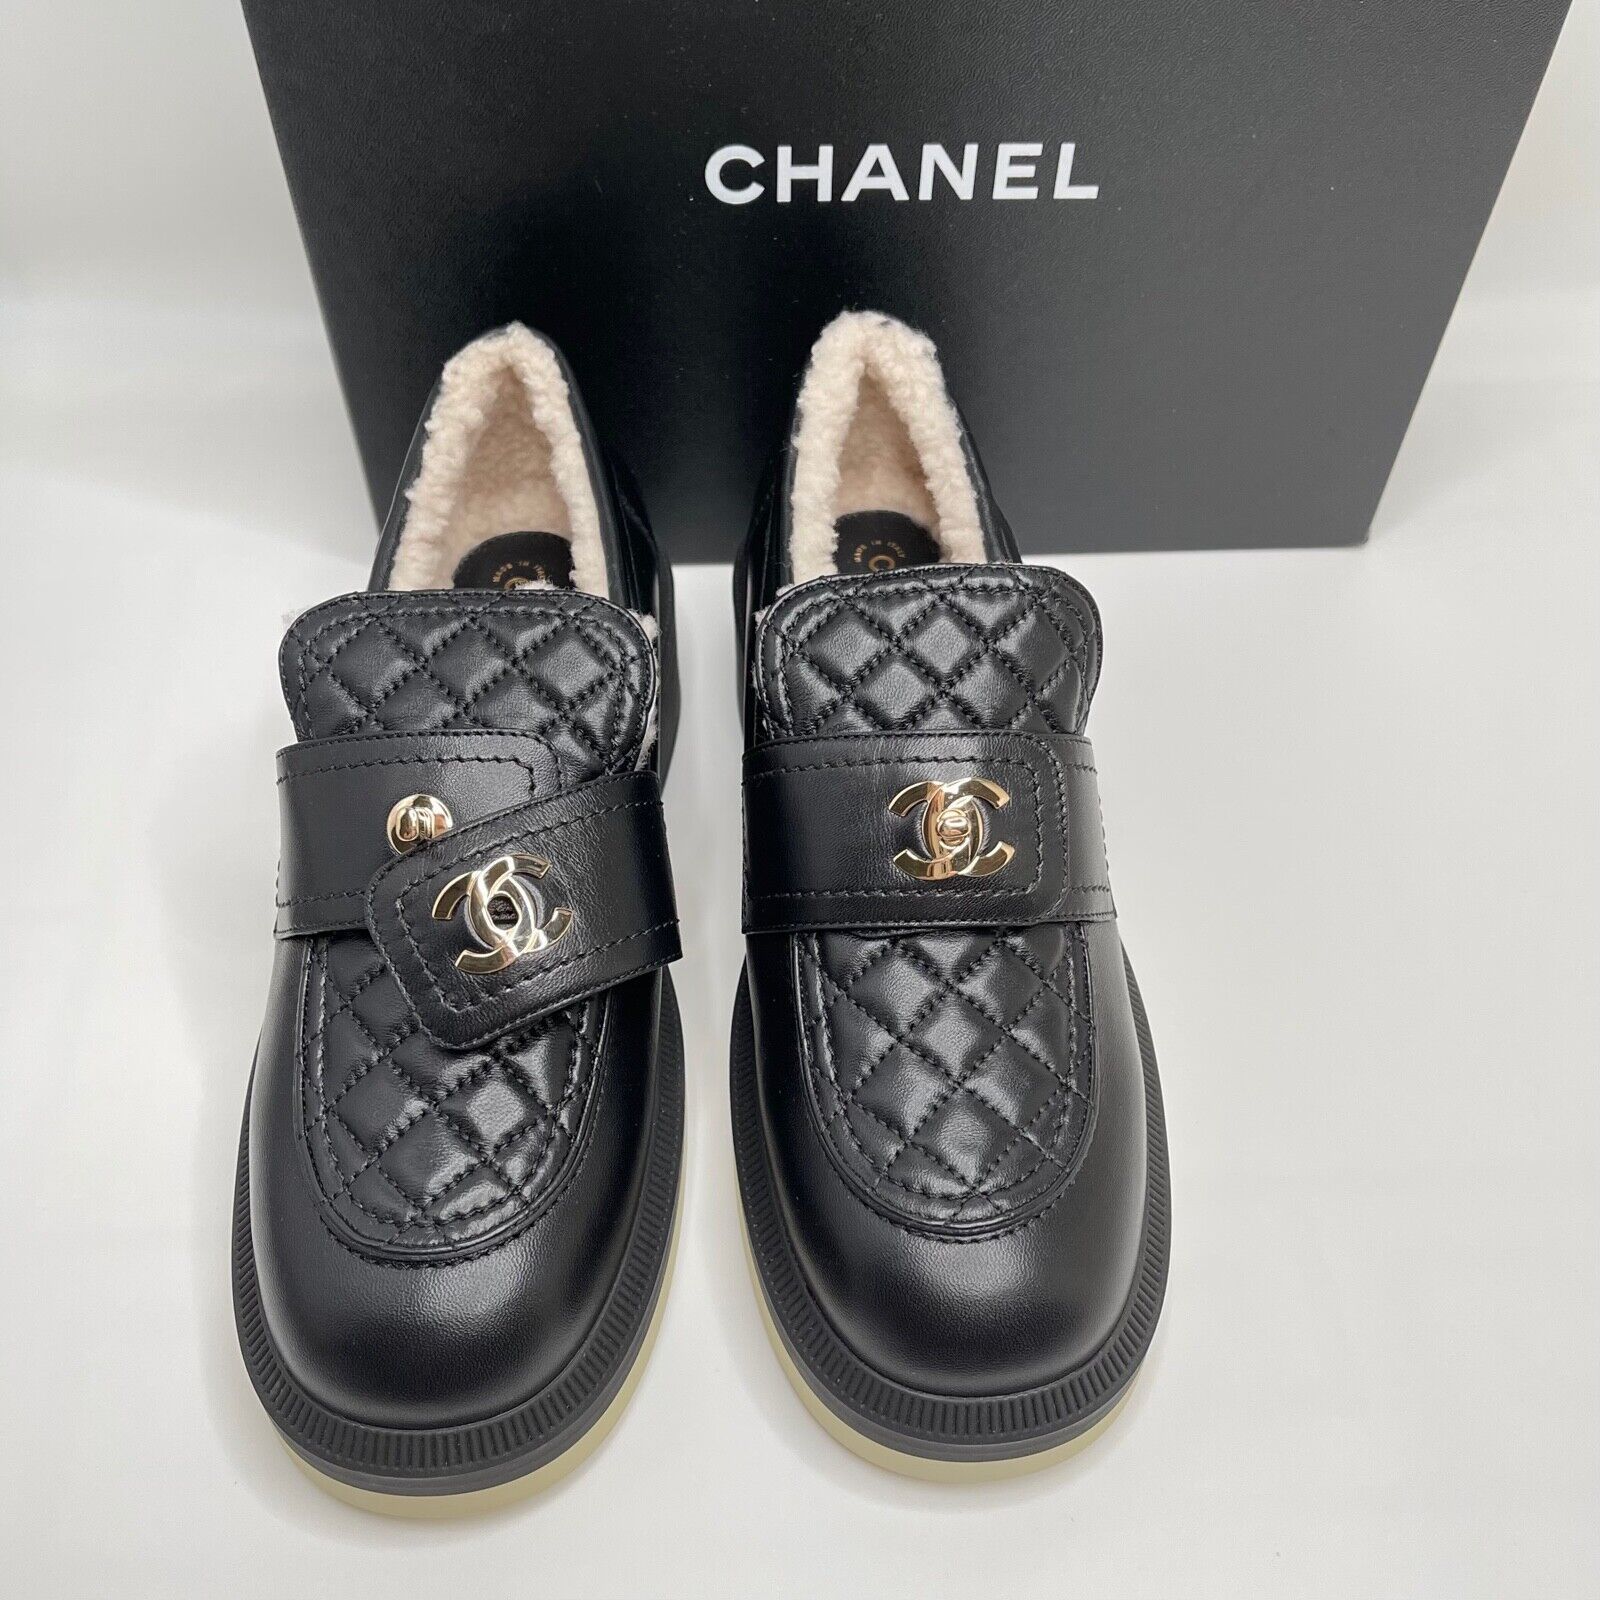 Chanel Leather Shearling Gold CC Turnlock Loafers 39.5 EUR Size